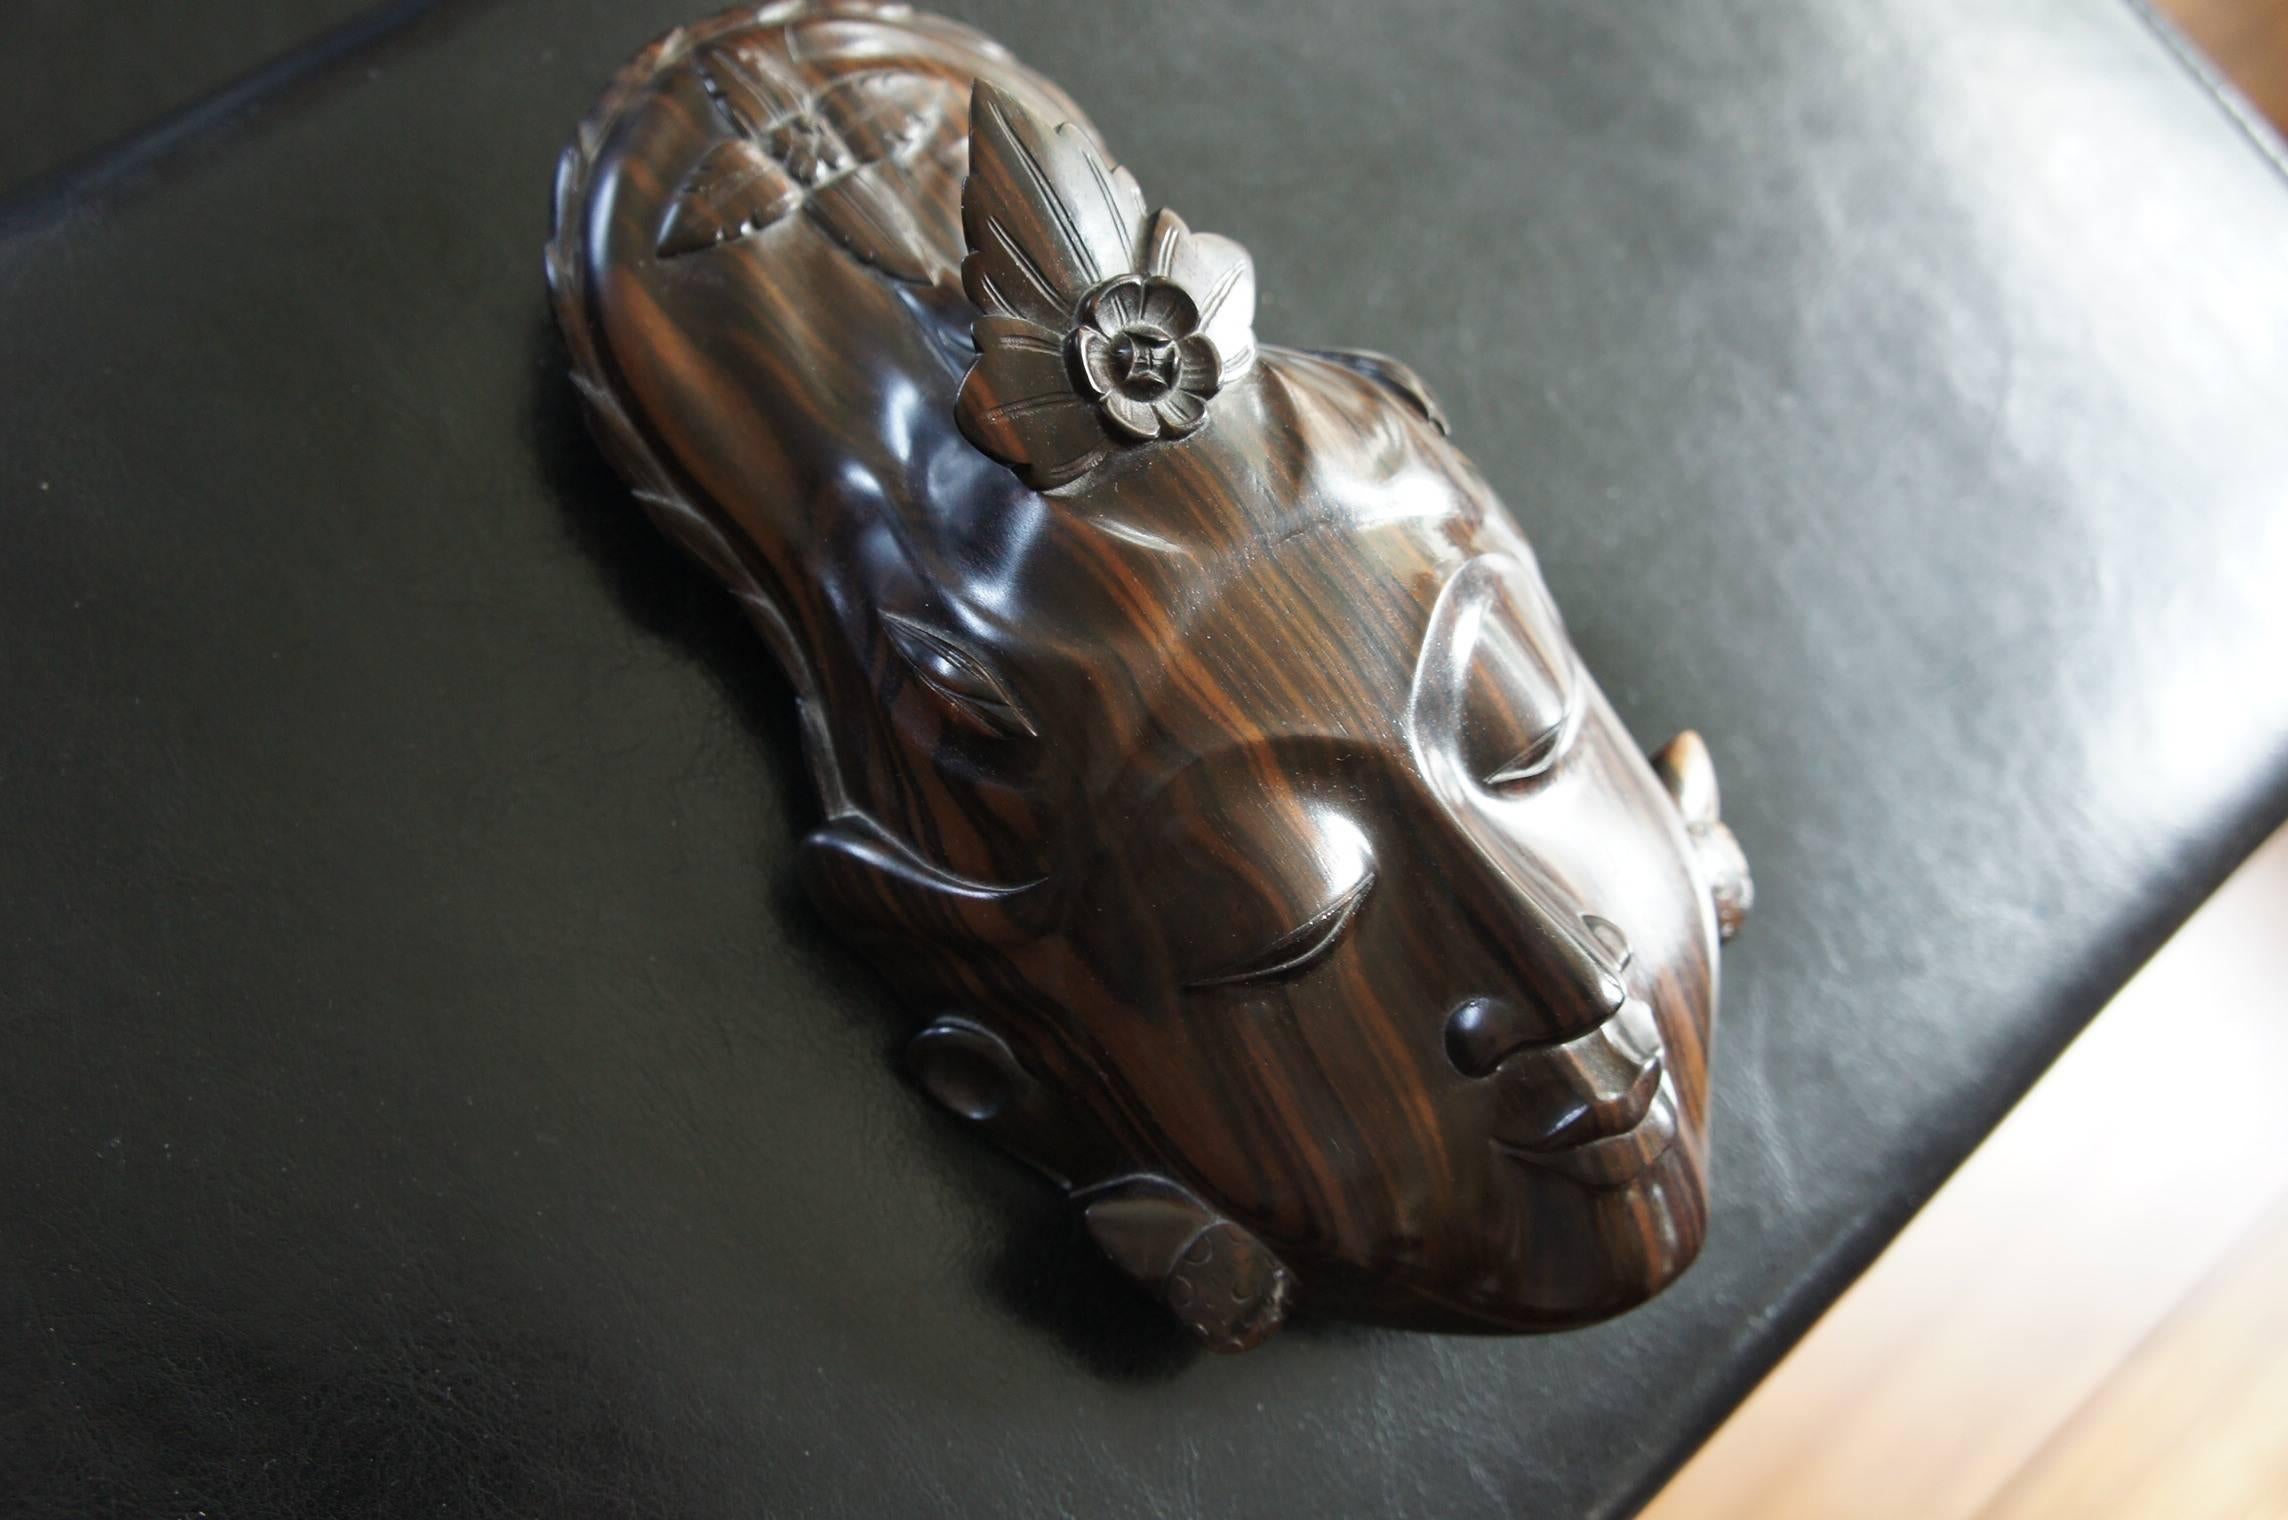 Stunning & serene mask of one the most expensive woodtypes on the planet.

Since the embargo on cutting trees that brought us Macassar ebony, the price for this beautiful hardwood has sky-rocketed. The current price per cubic meter of this